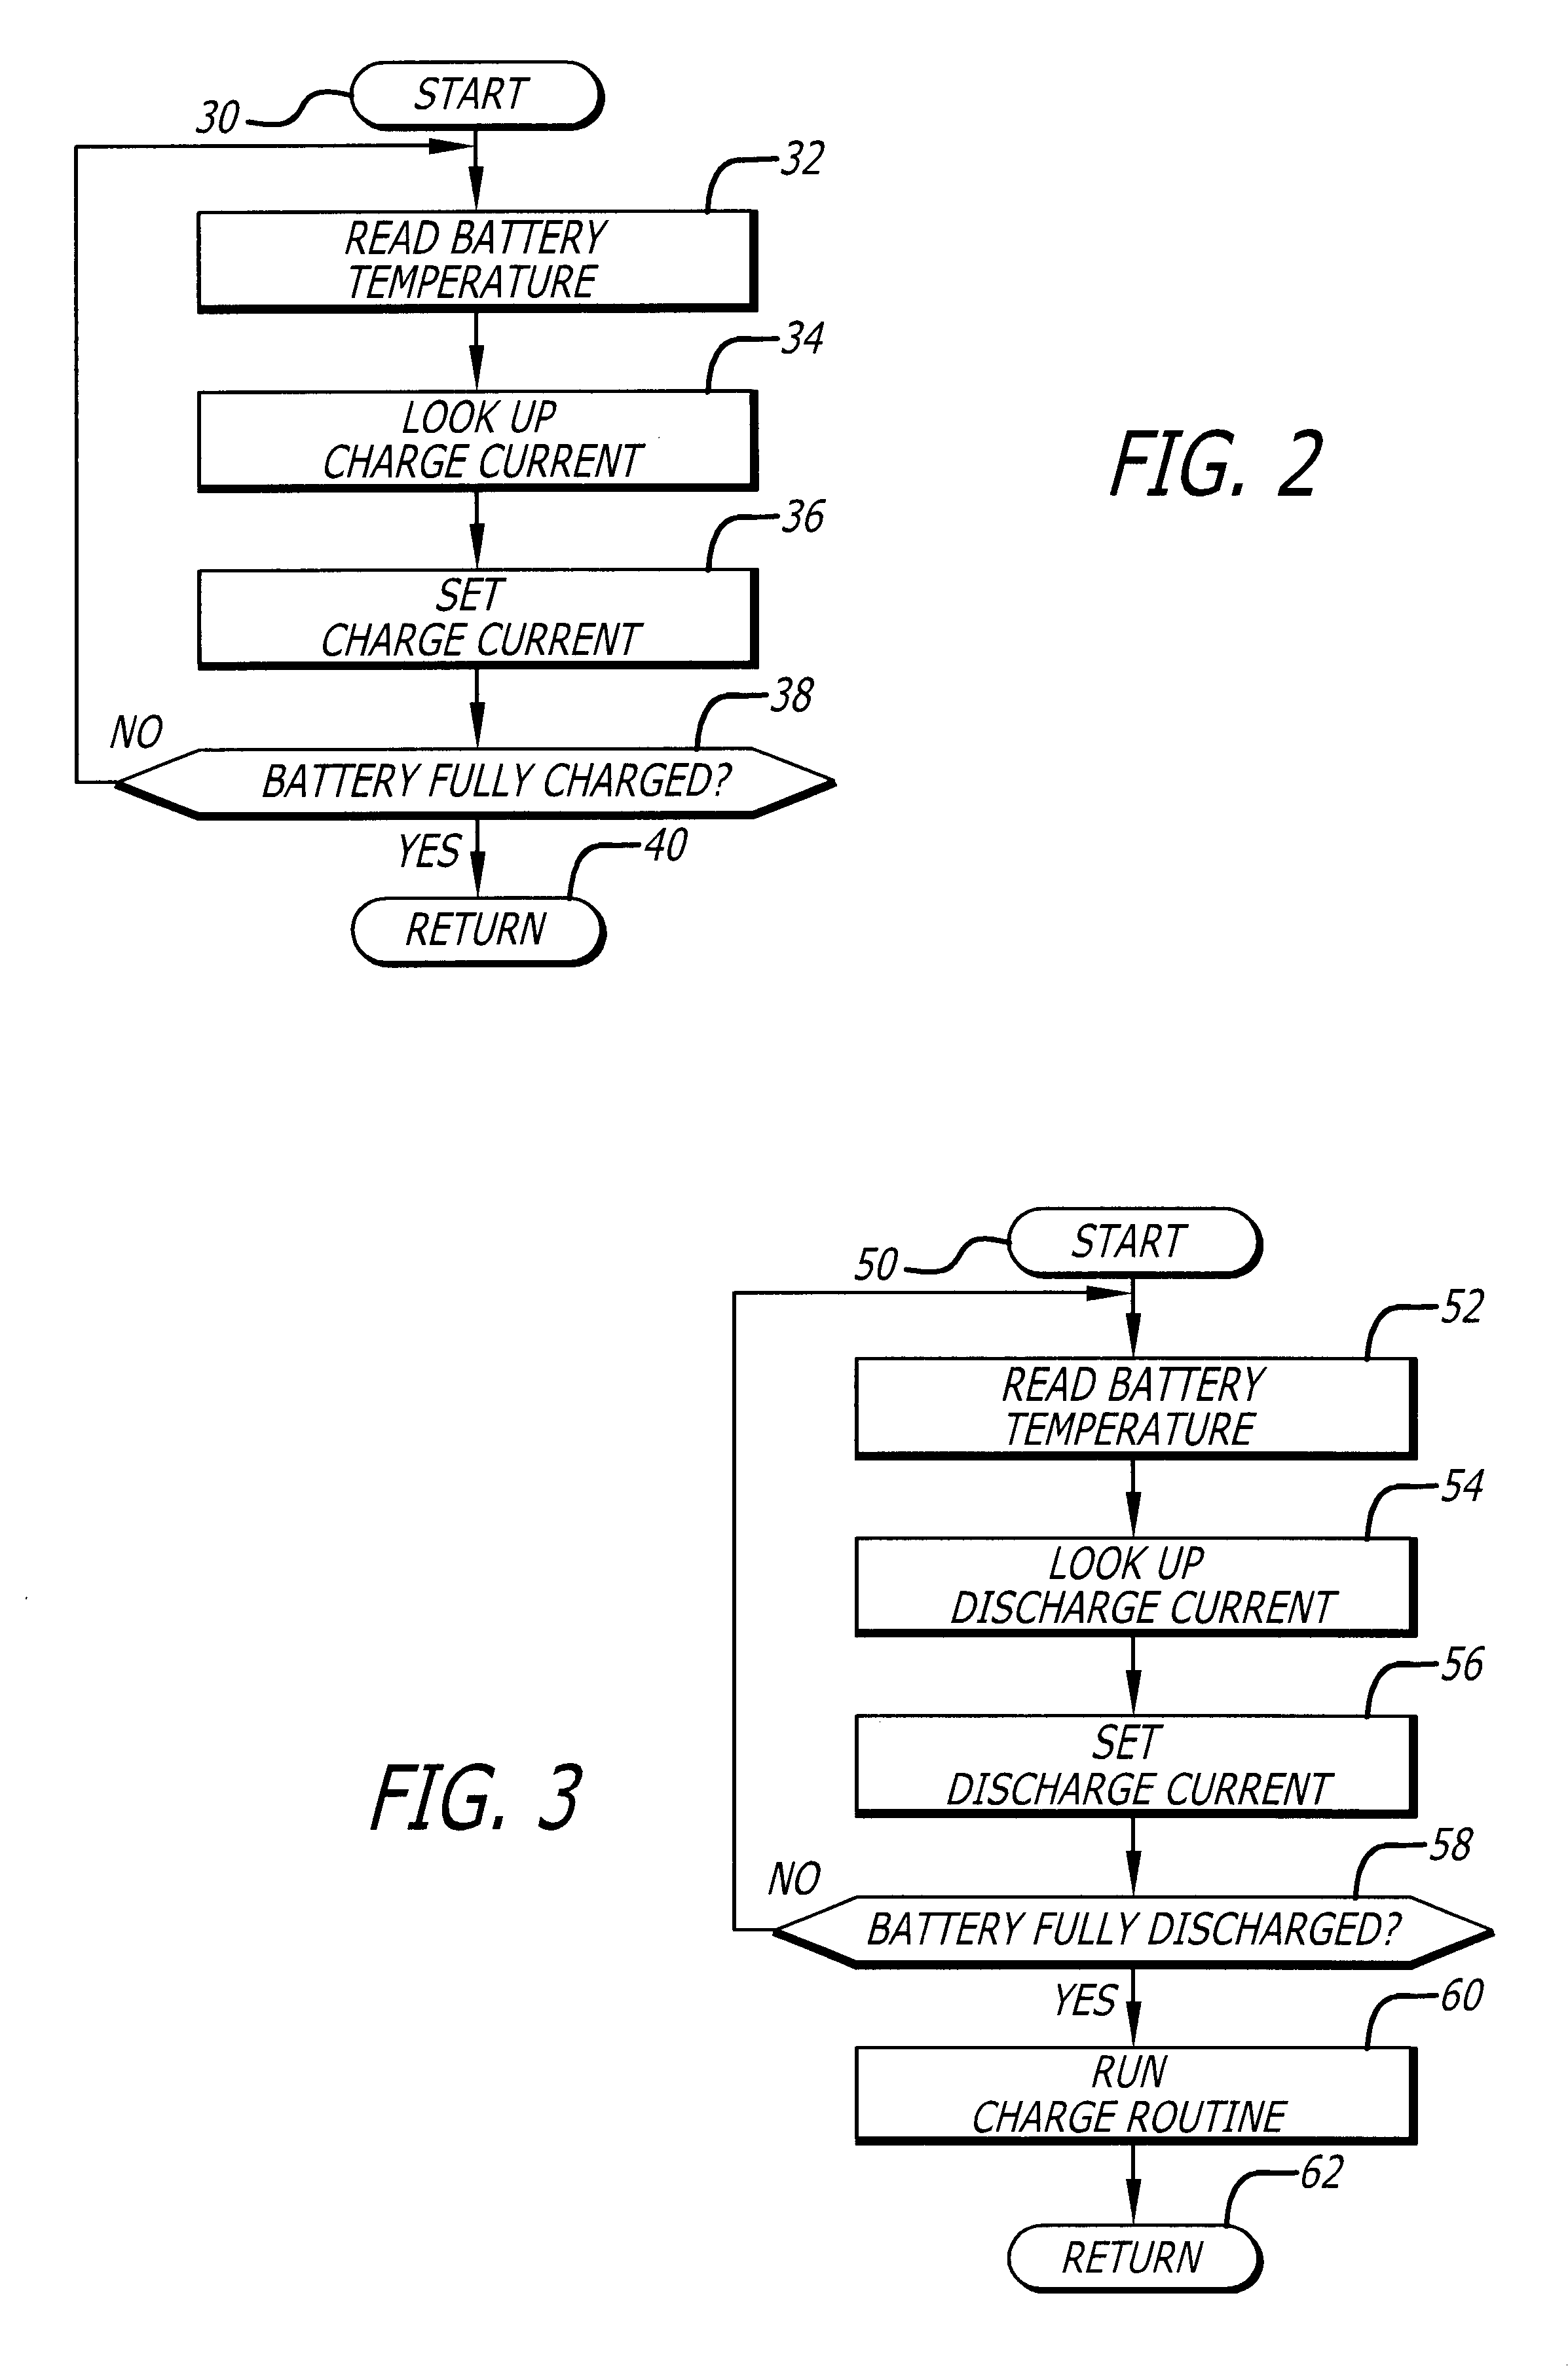 Battery charging and discharging system optimized for high temperature environments